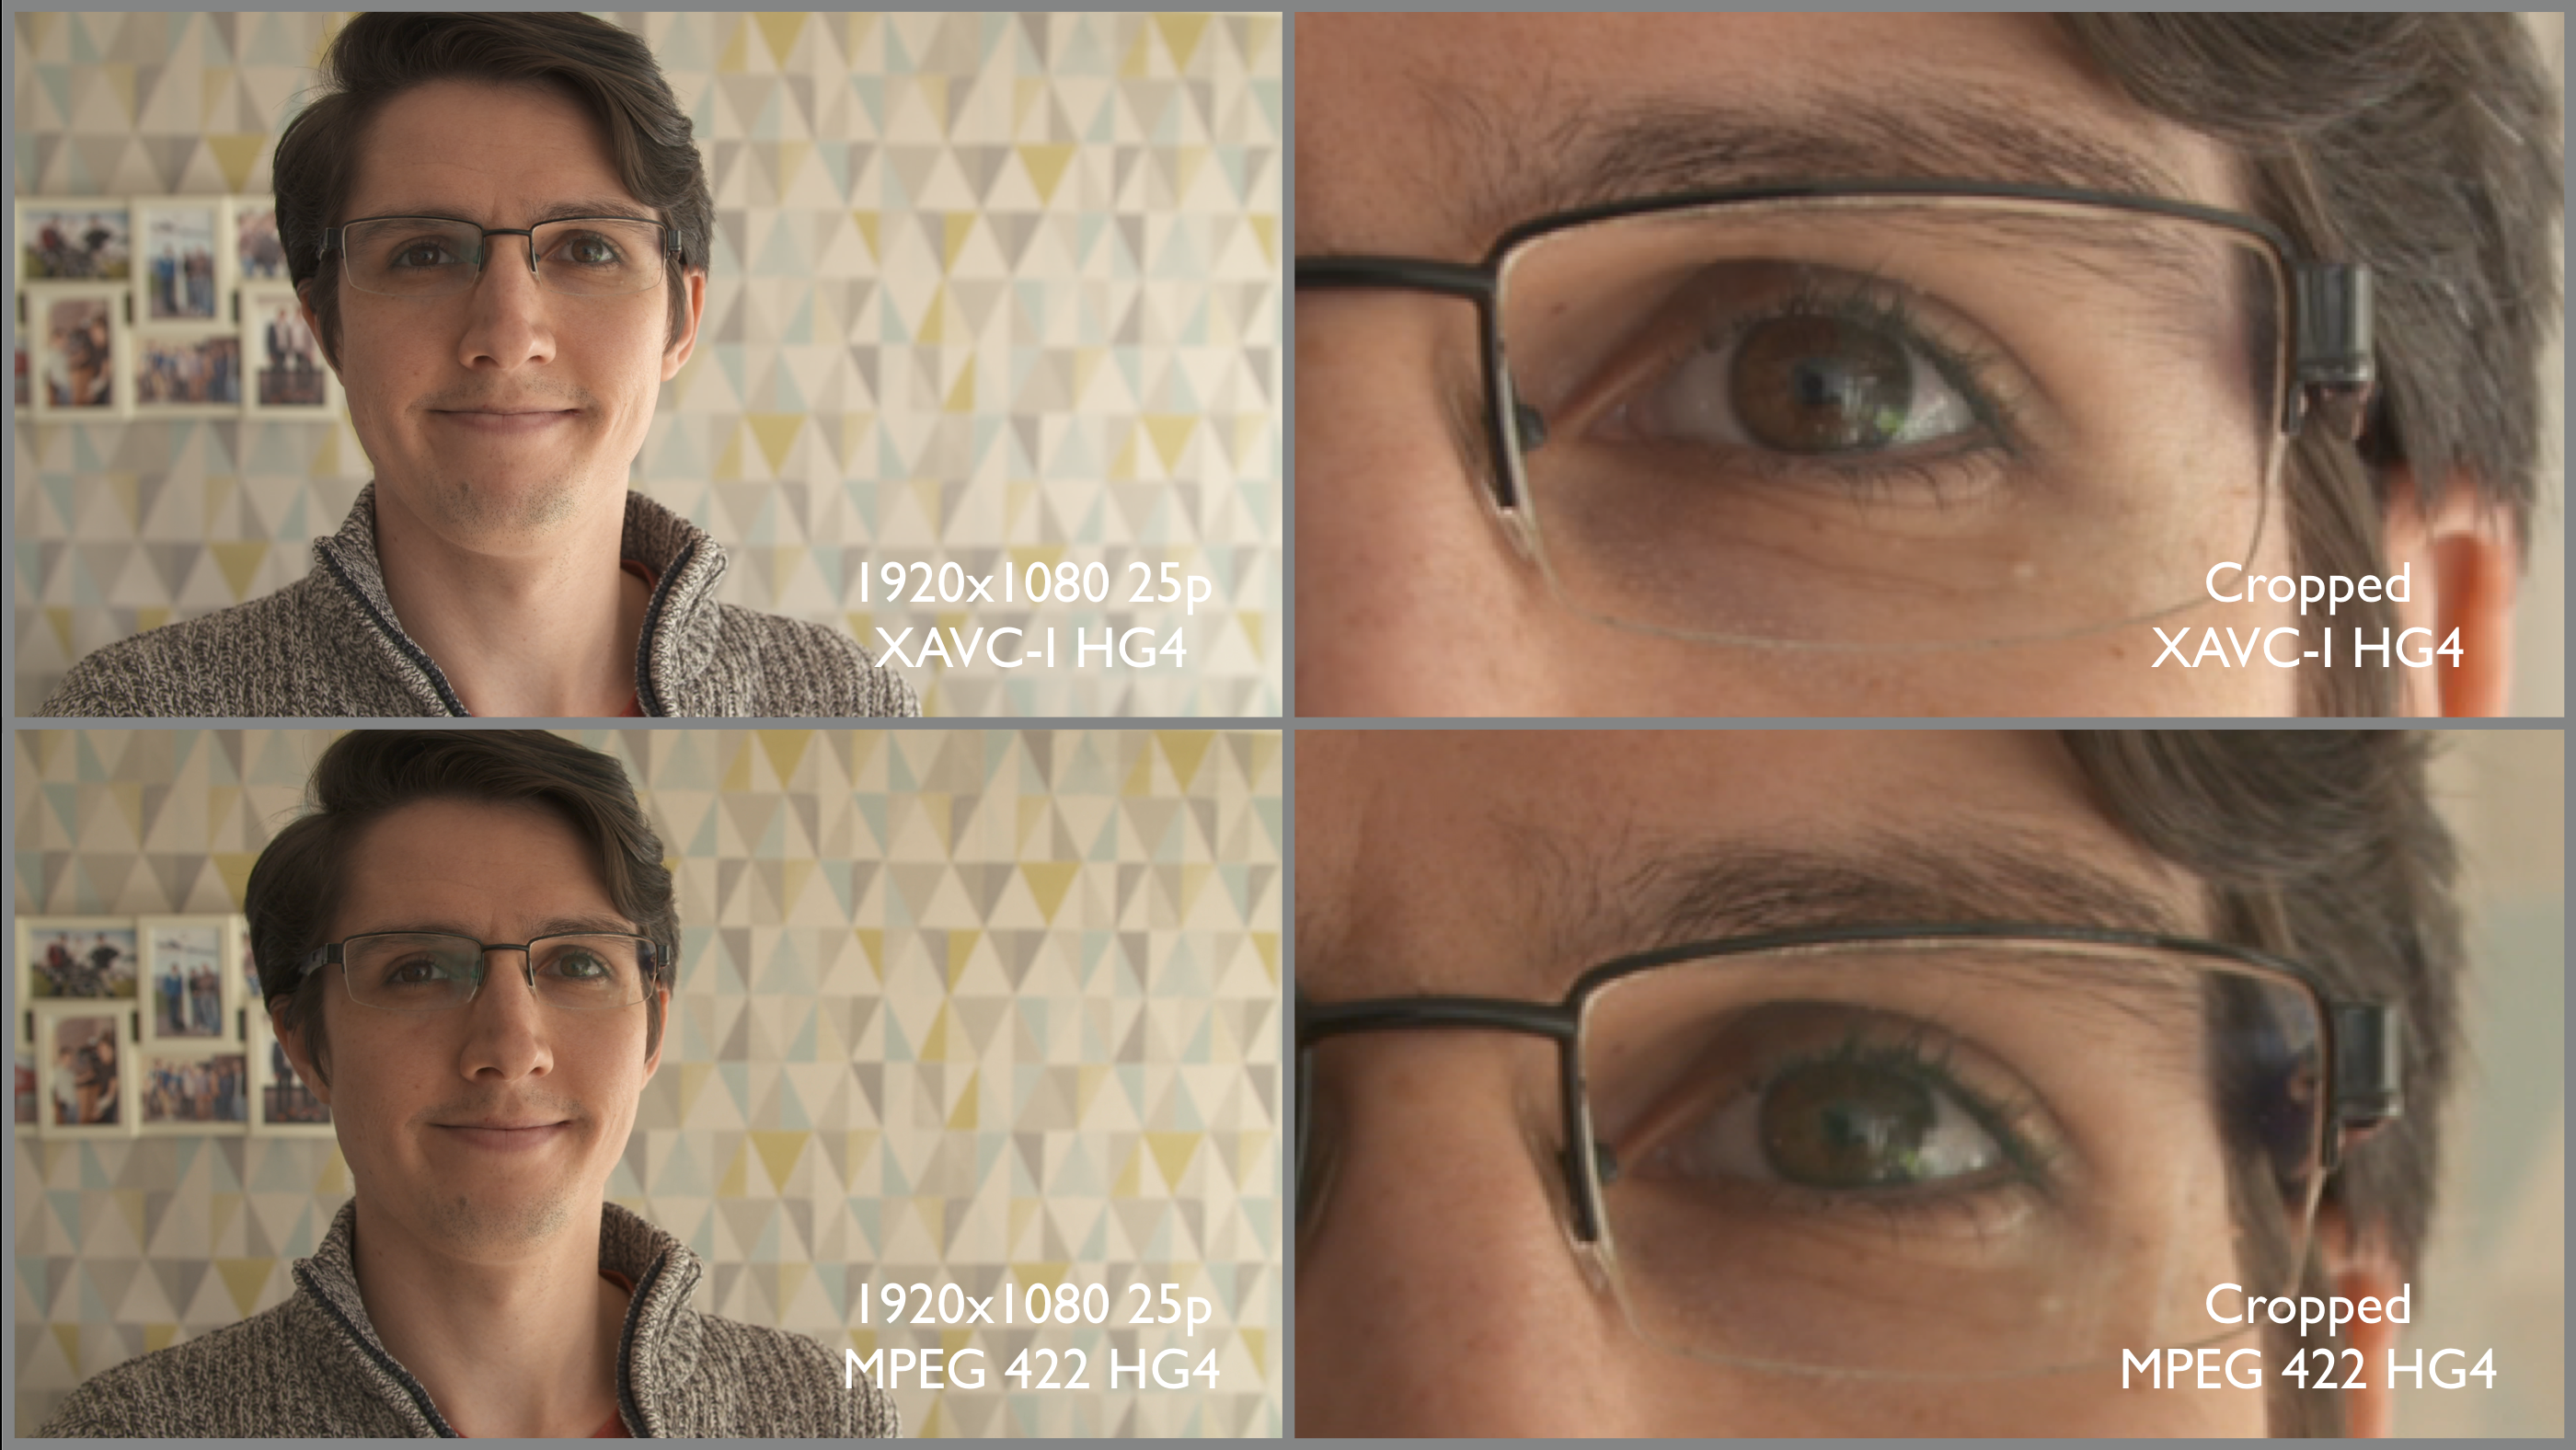 A comparison between XAVC-I and MPEG 422 image quality from the FS7